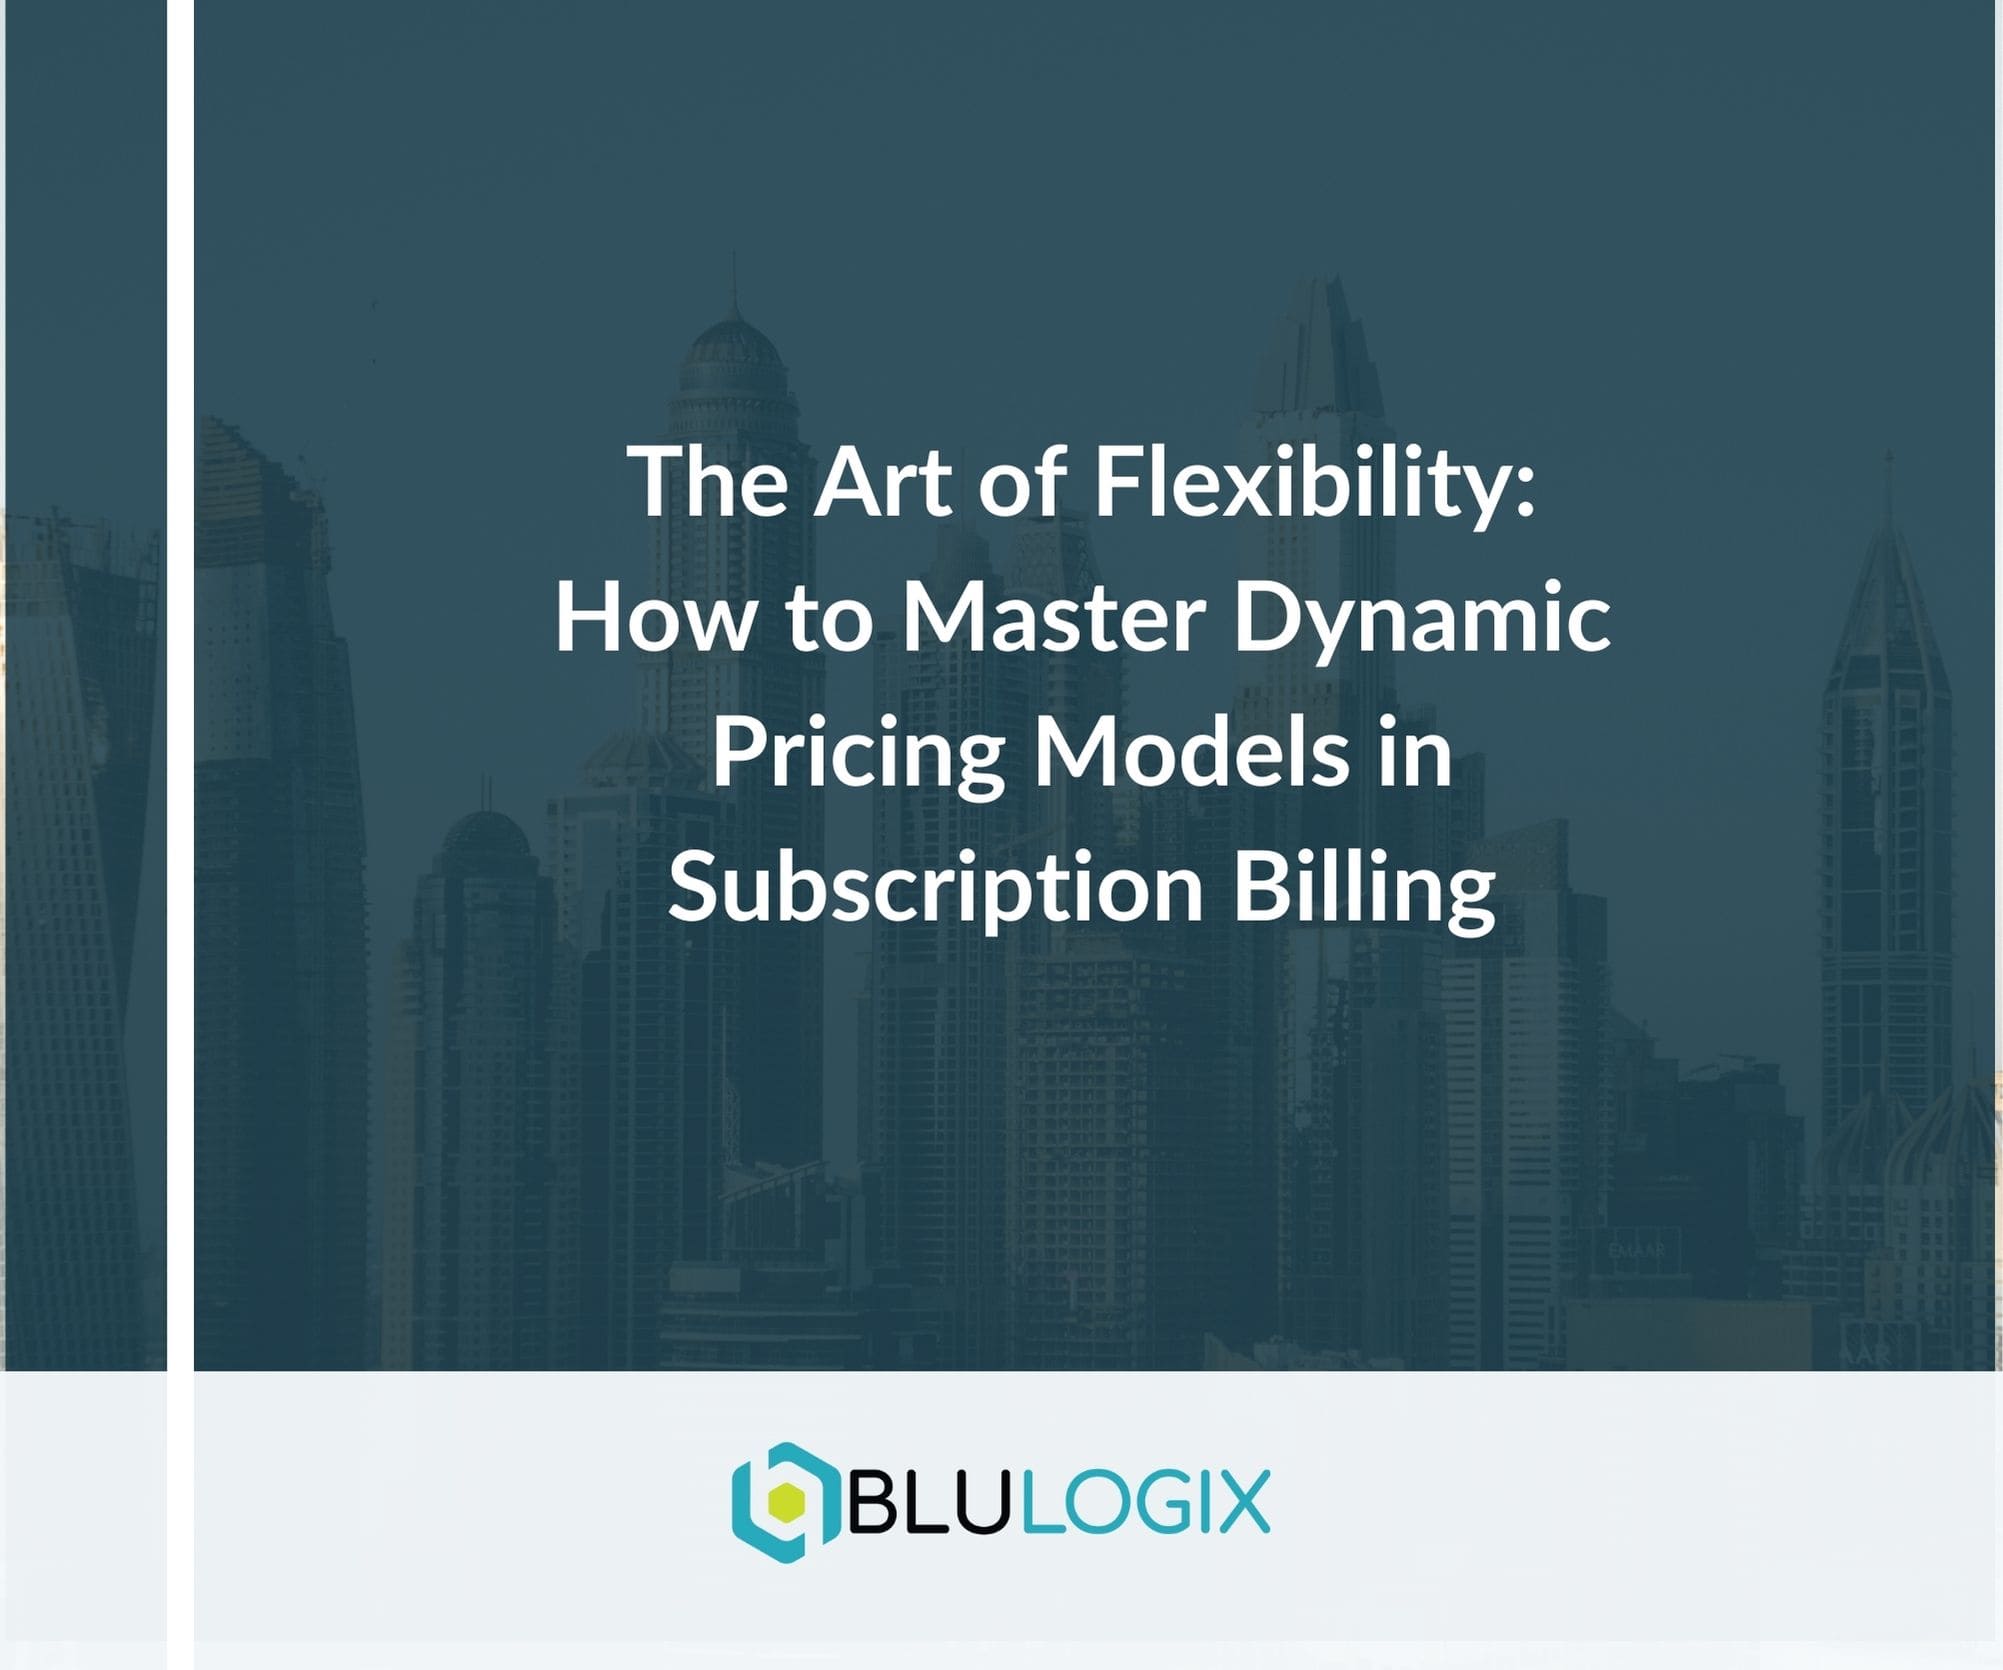 The Art of Flexibility How to Master Dynamic Pricing Models in Subscription Billing